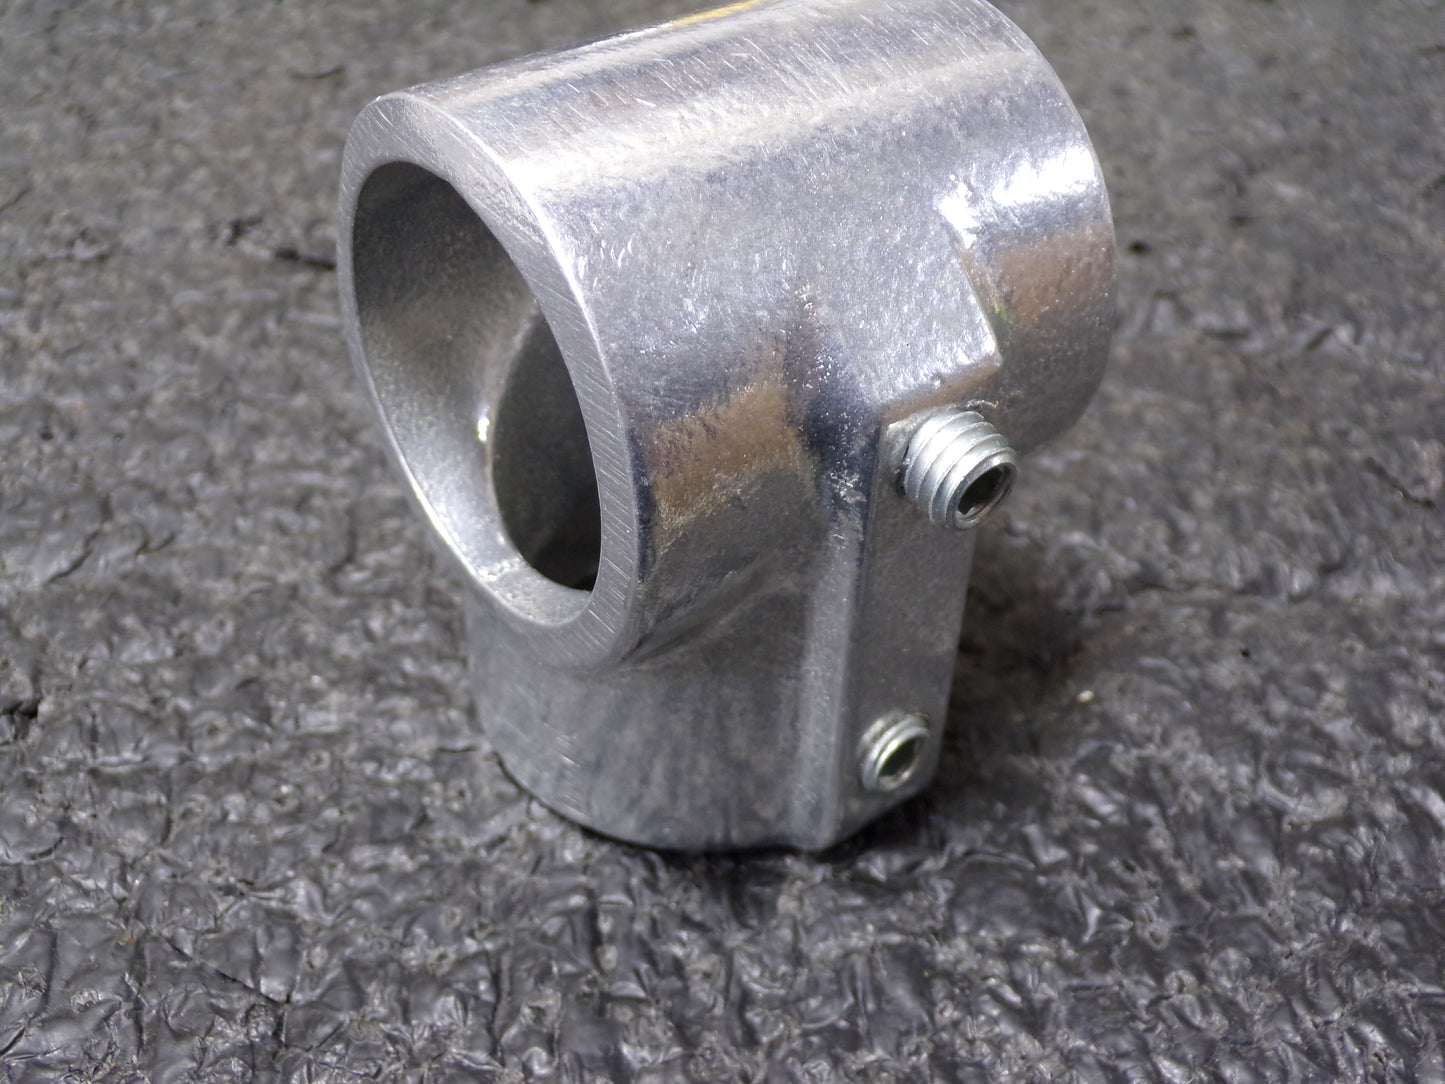 HOLLAENDER Structural Pipe Fitting: Tee, 1 1/4 in For Pipe Size, For 1 5/8 in Actual Pipe Outer Dia, Aluminum (CR00705-WTA18)